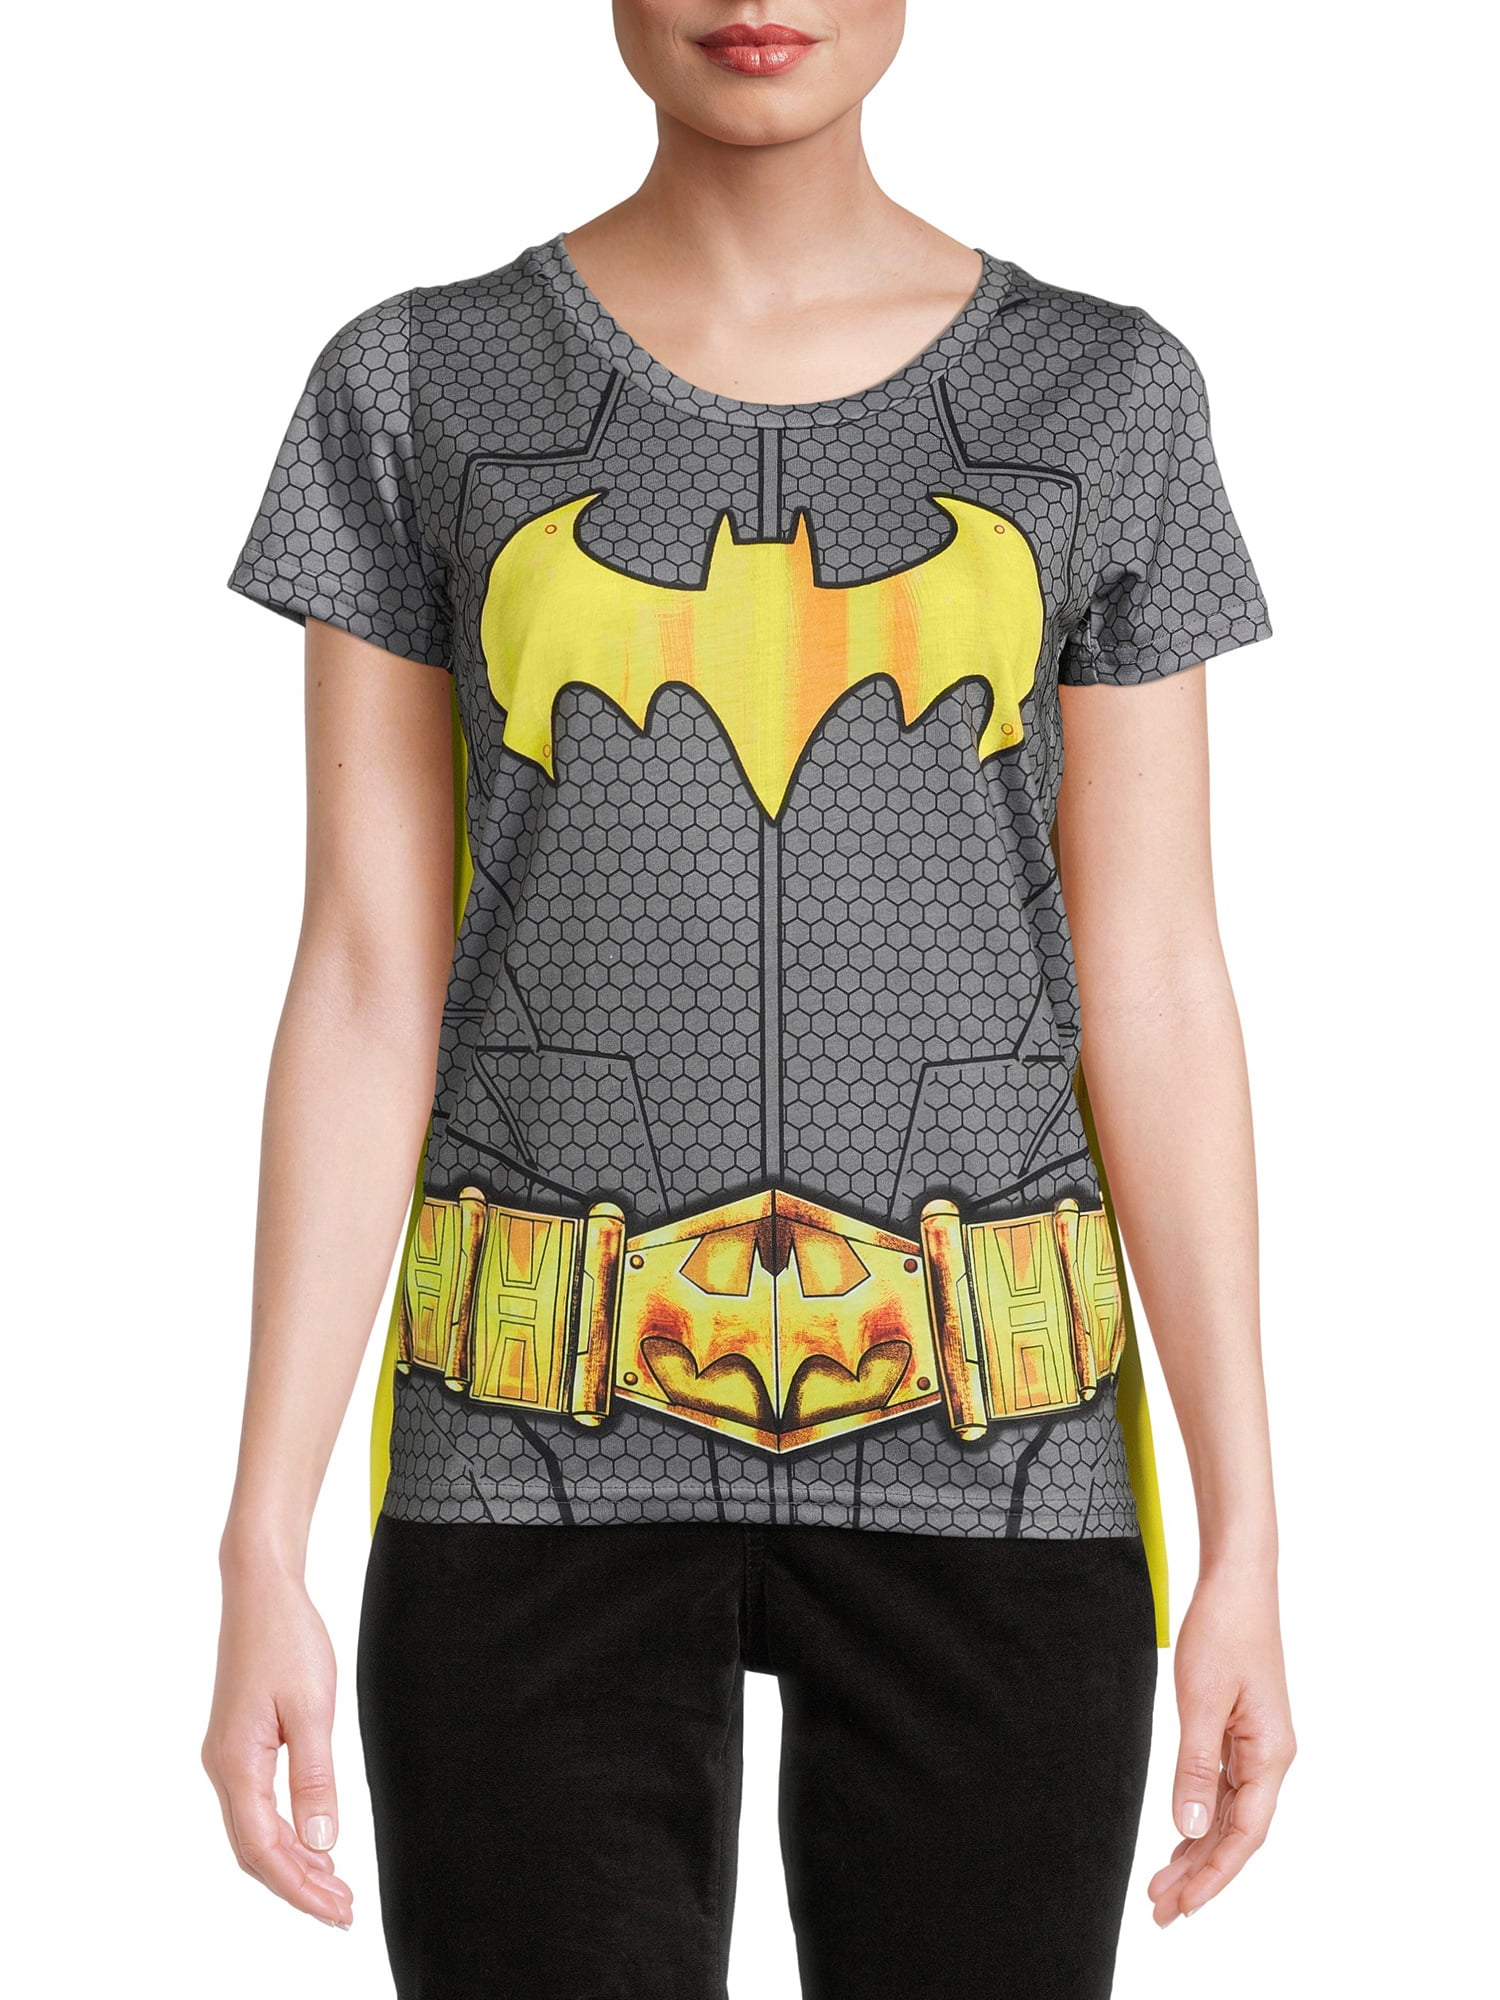 BATMAN OR SUPERMAN TSHIRT WITH REMOVABLE CAPE